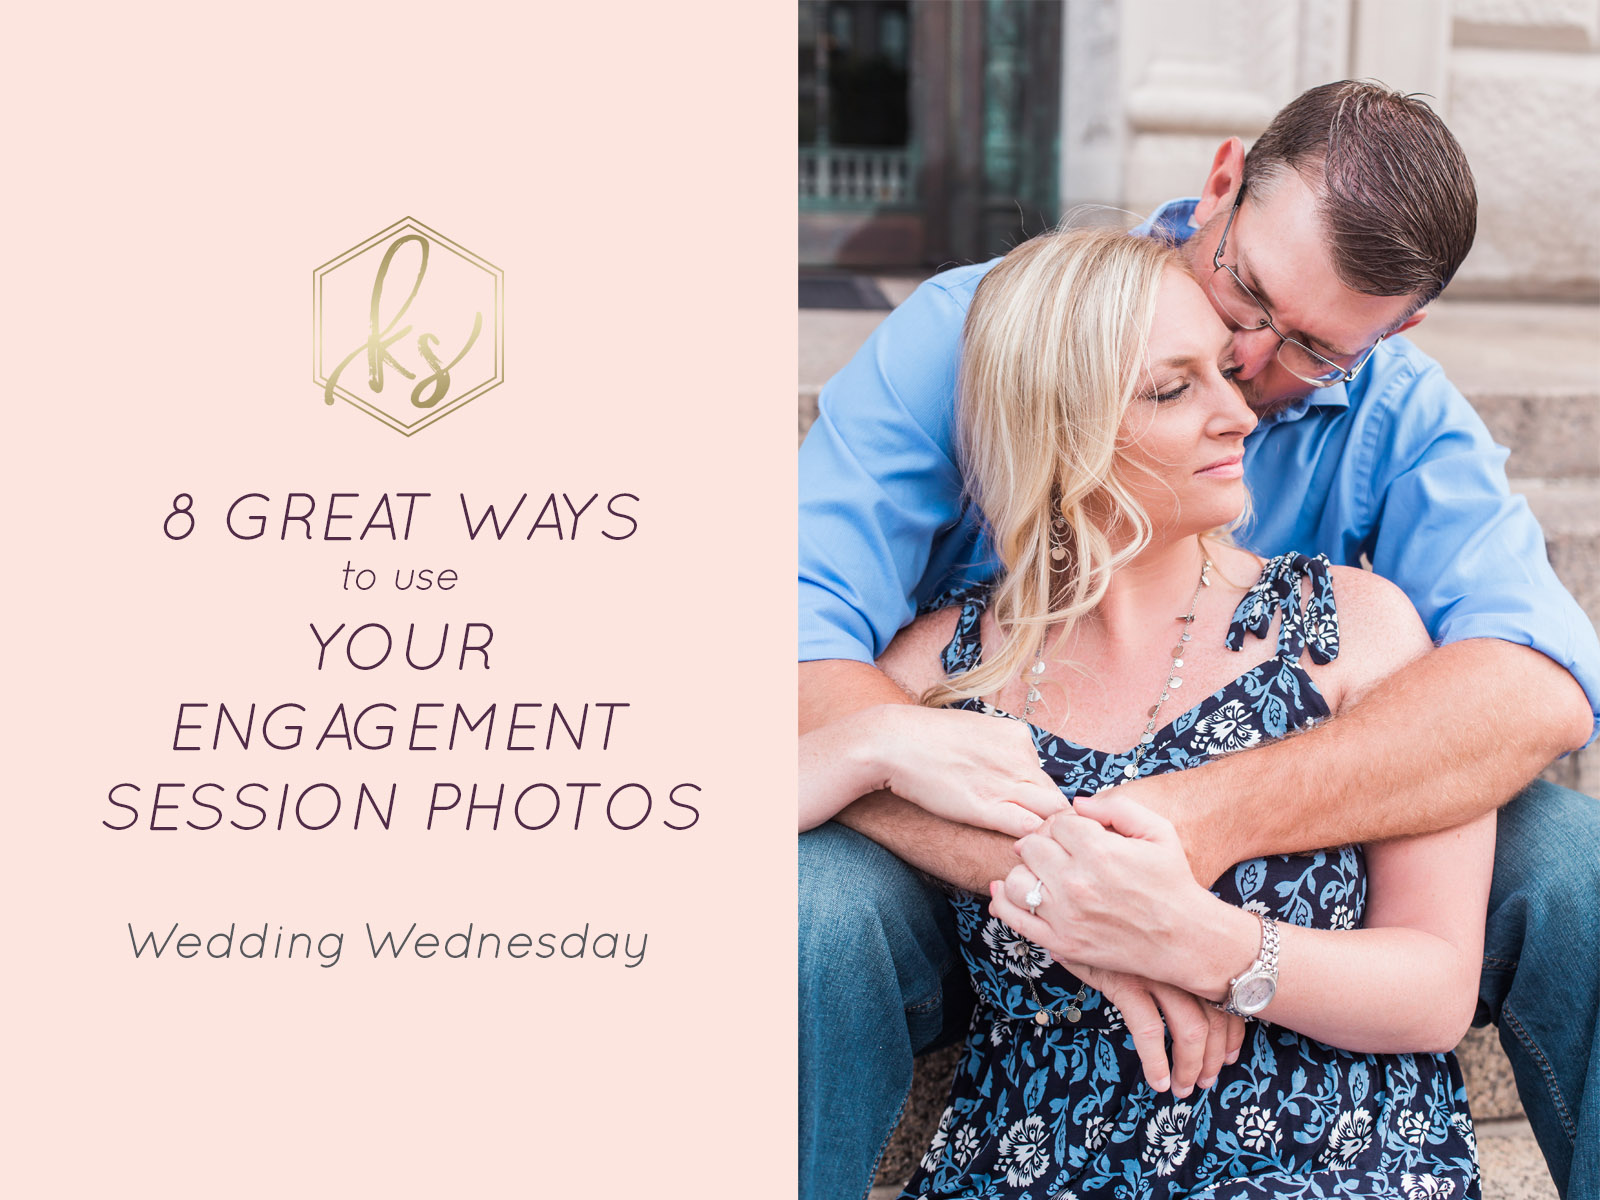 How to Use Your Engagement Photos